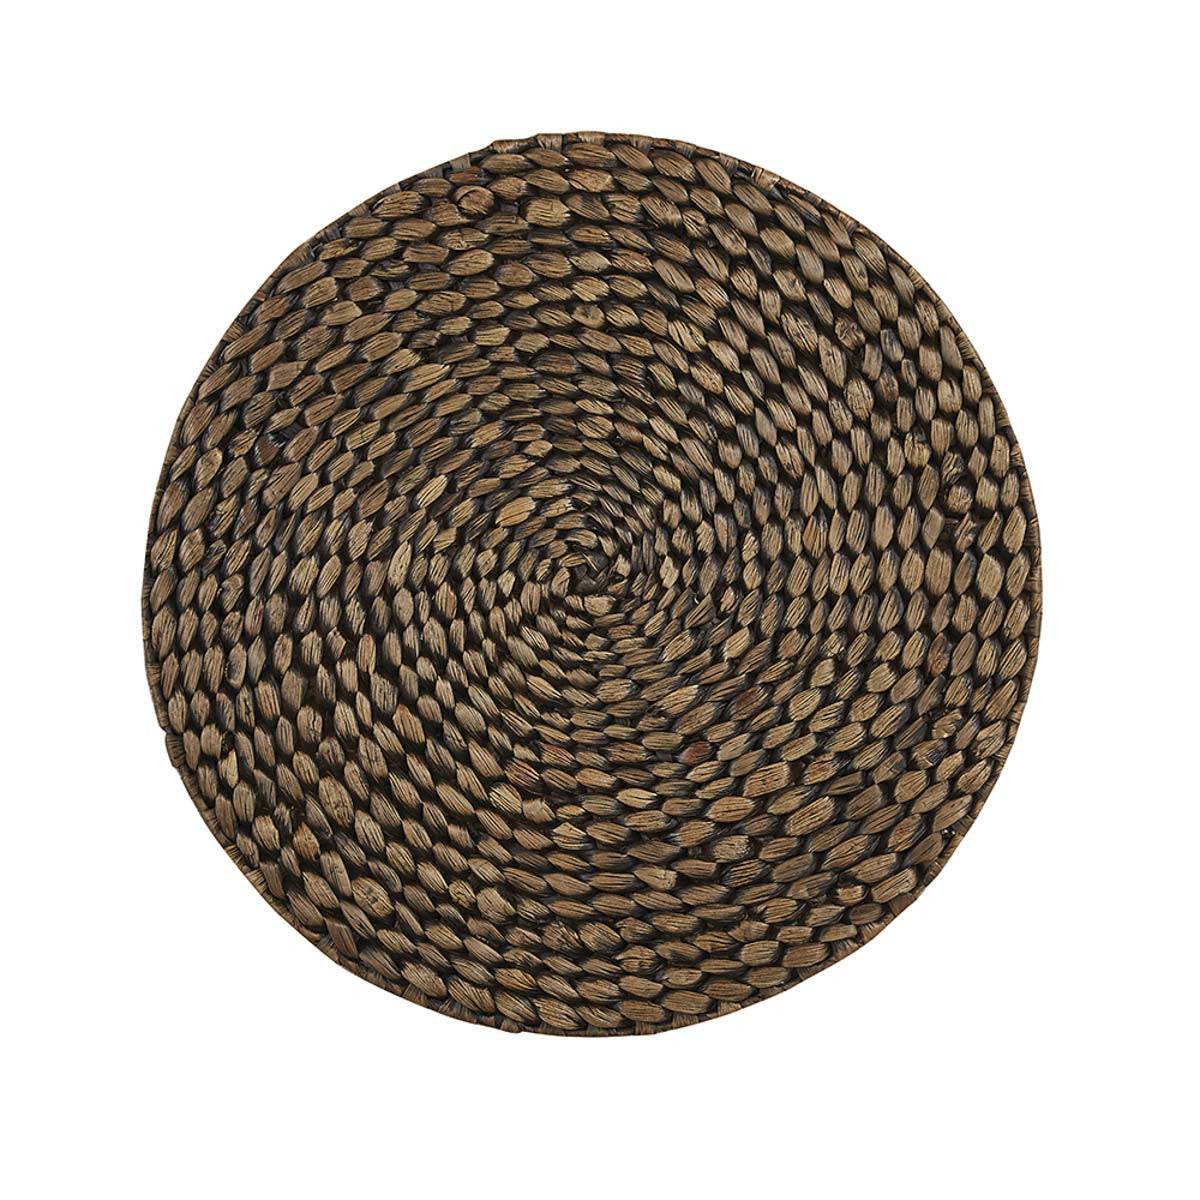 View Split P - Braided Hyacinth Round Placemat - Brown